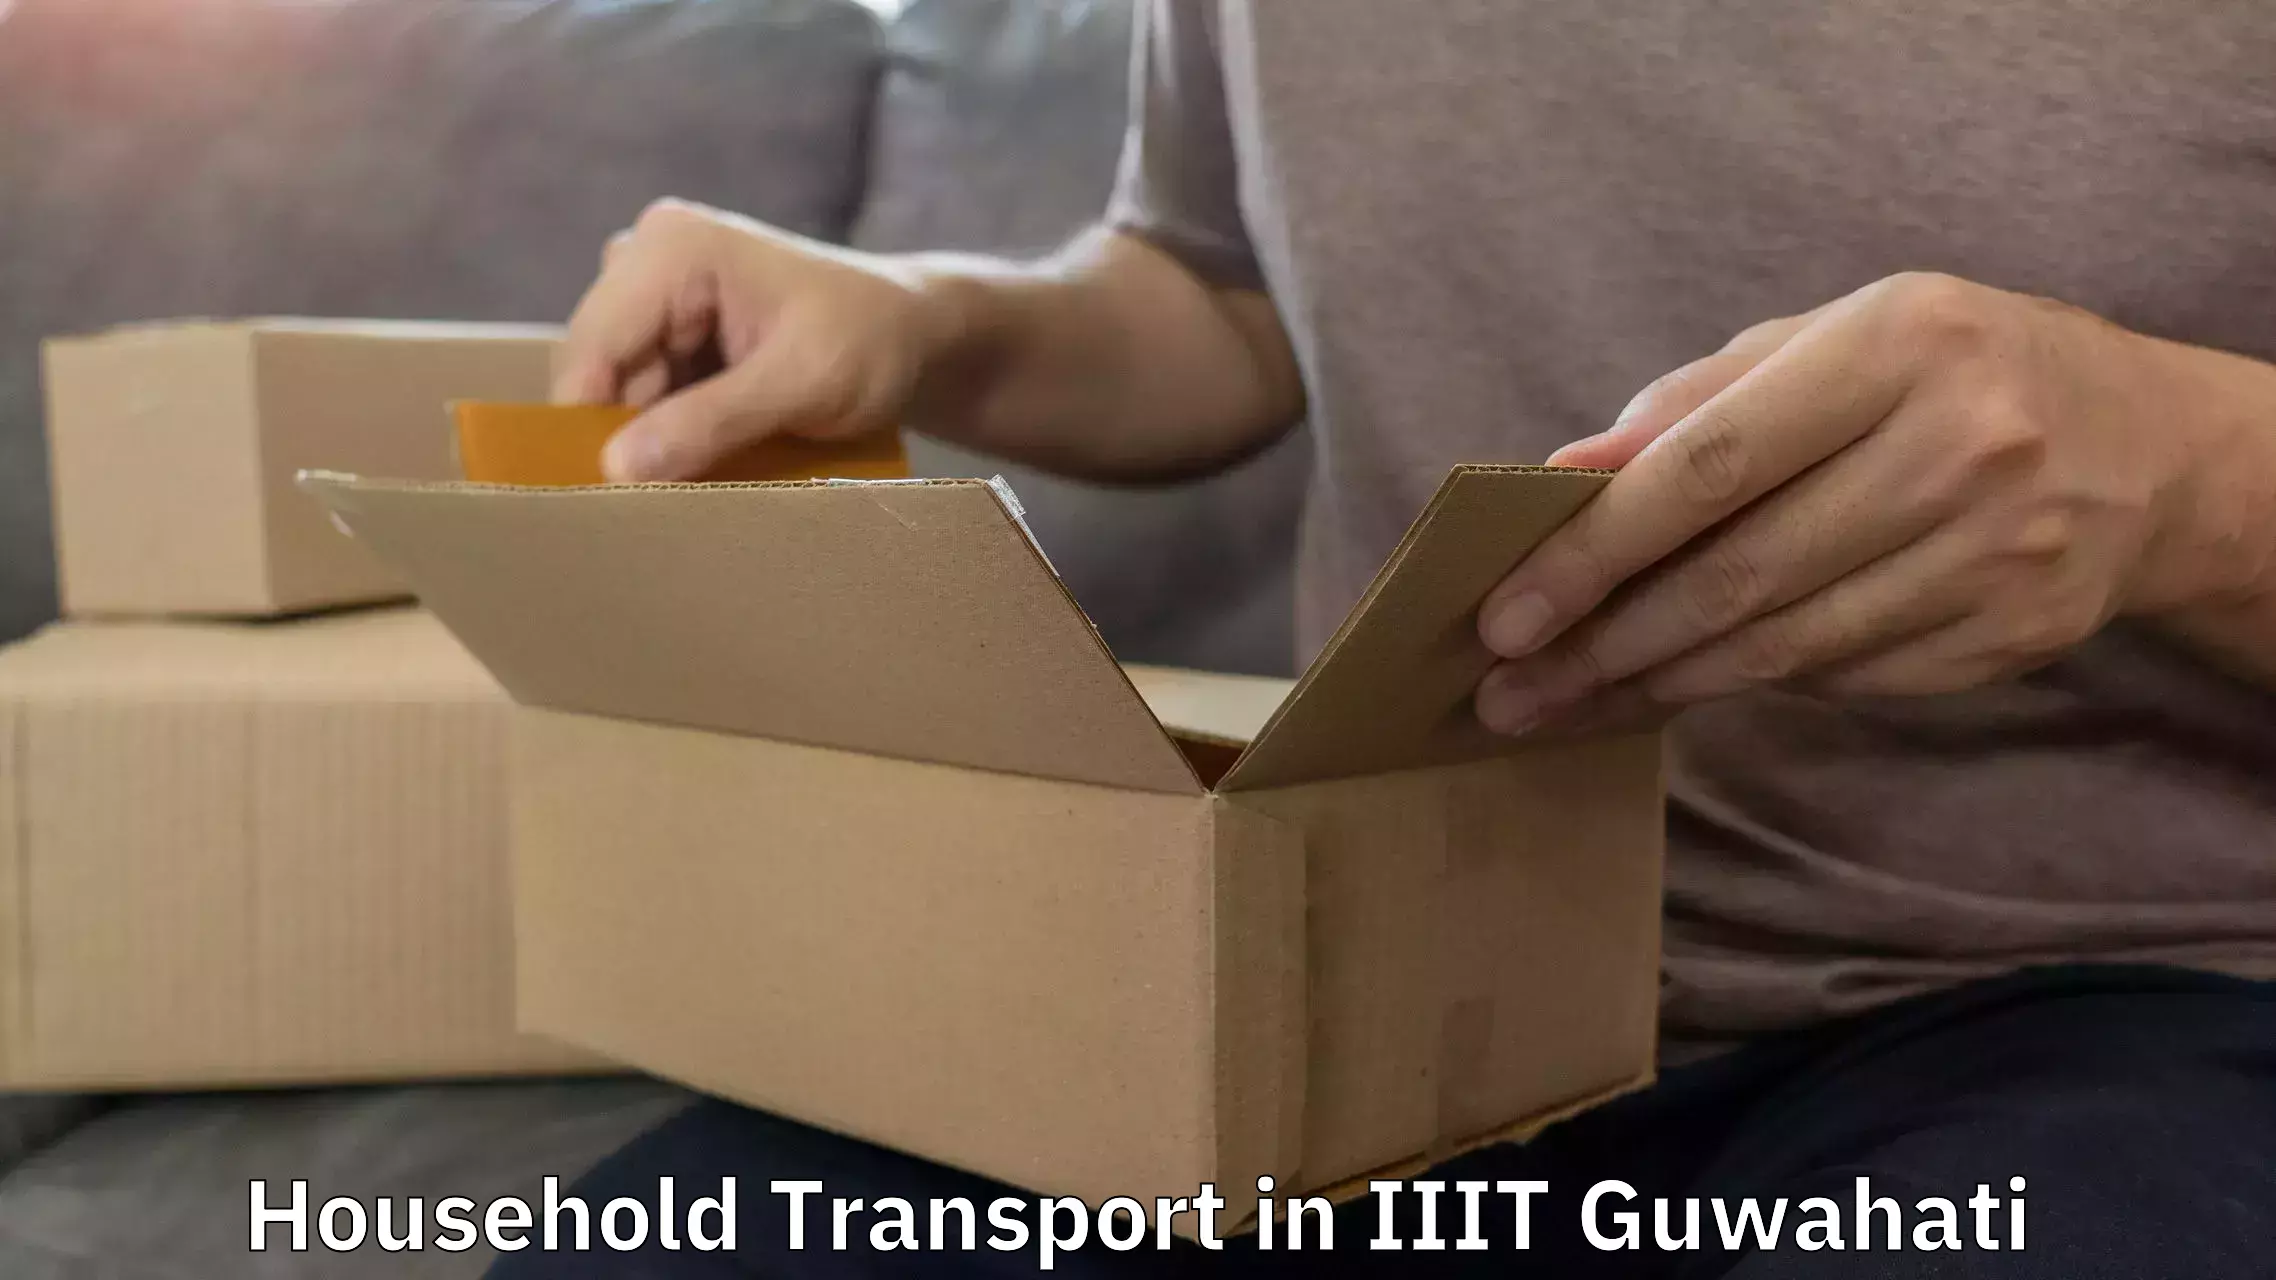 Professional moving assistance in IIIT Guwahati